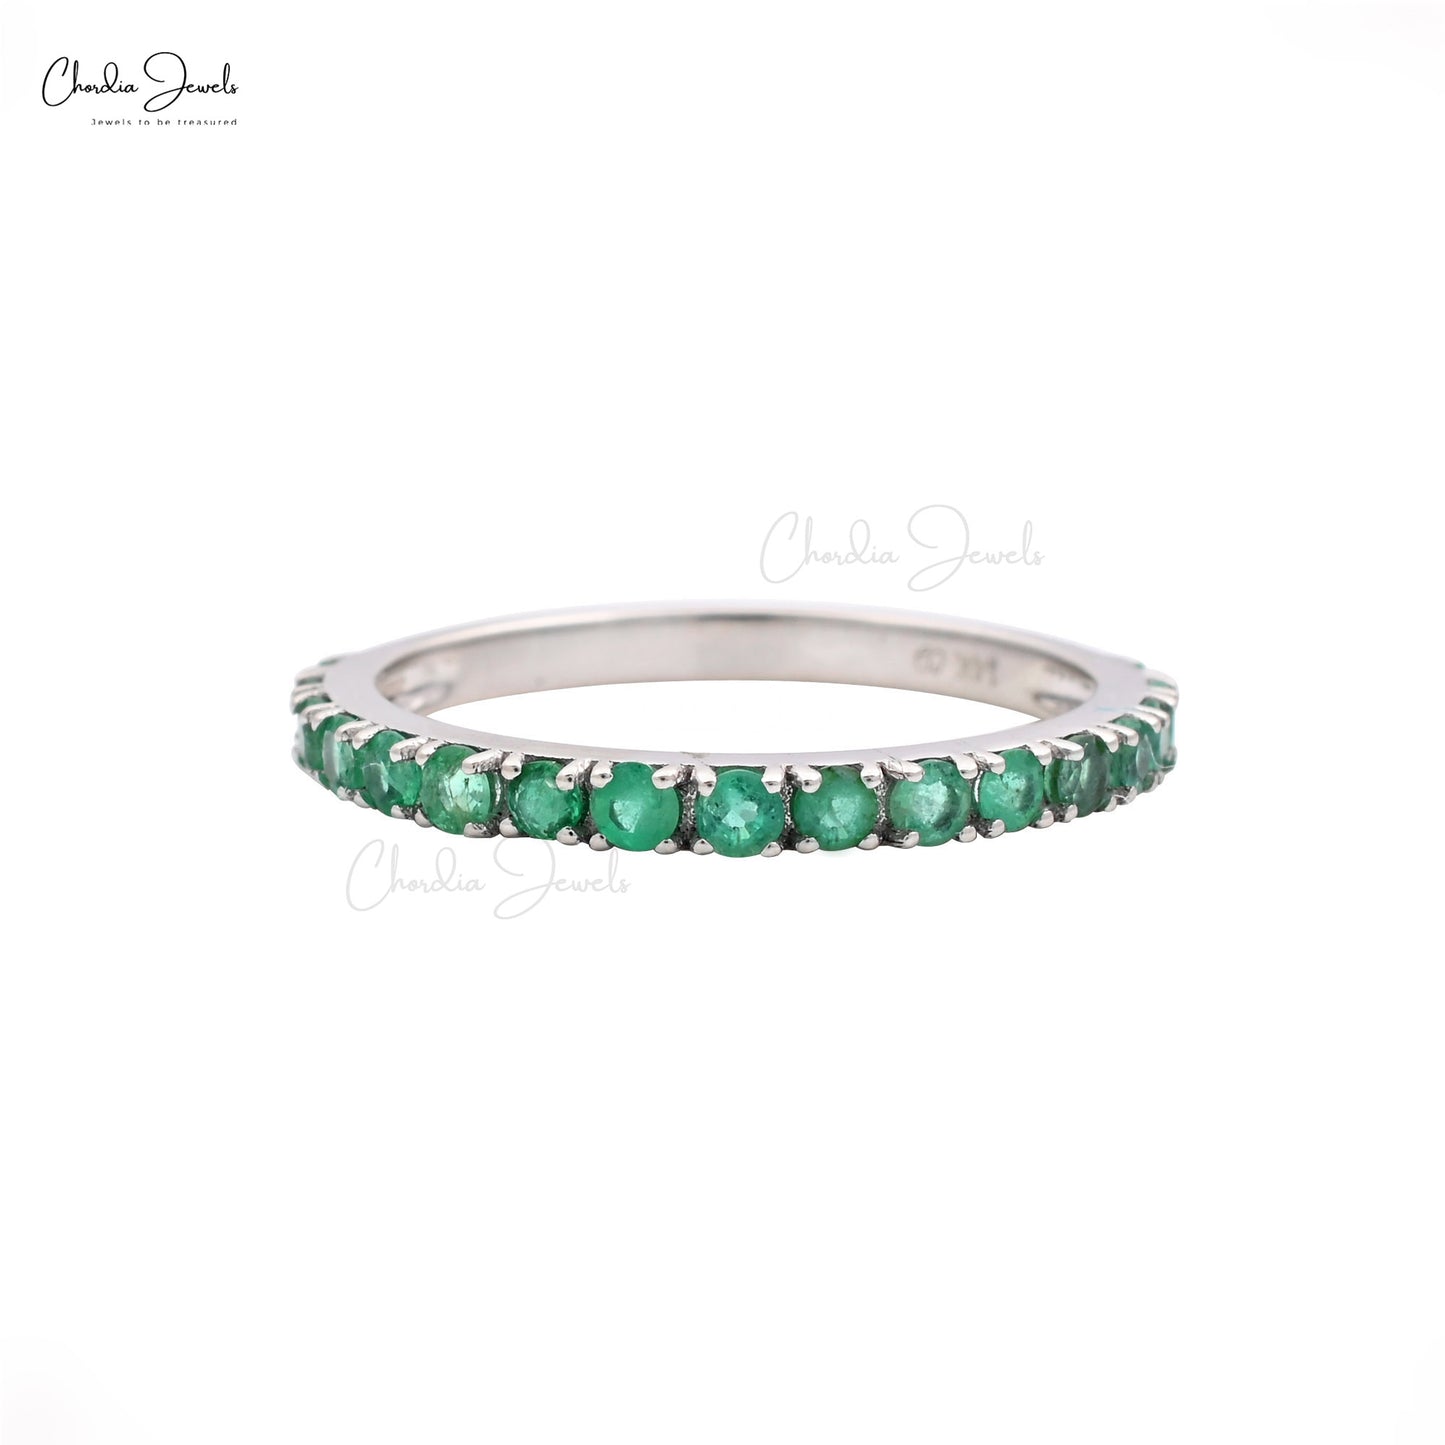 Dive into enchanting world of glamour with this dainty emerald ring